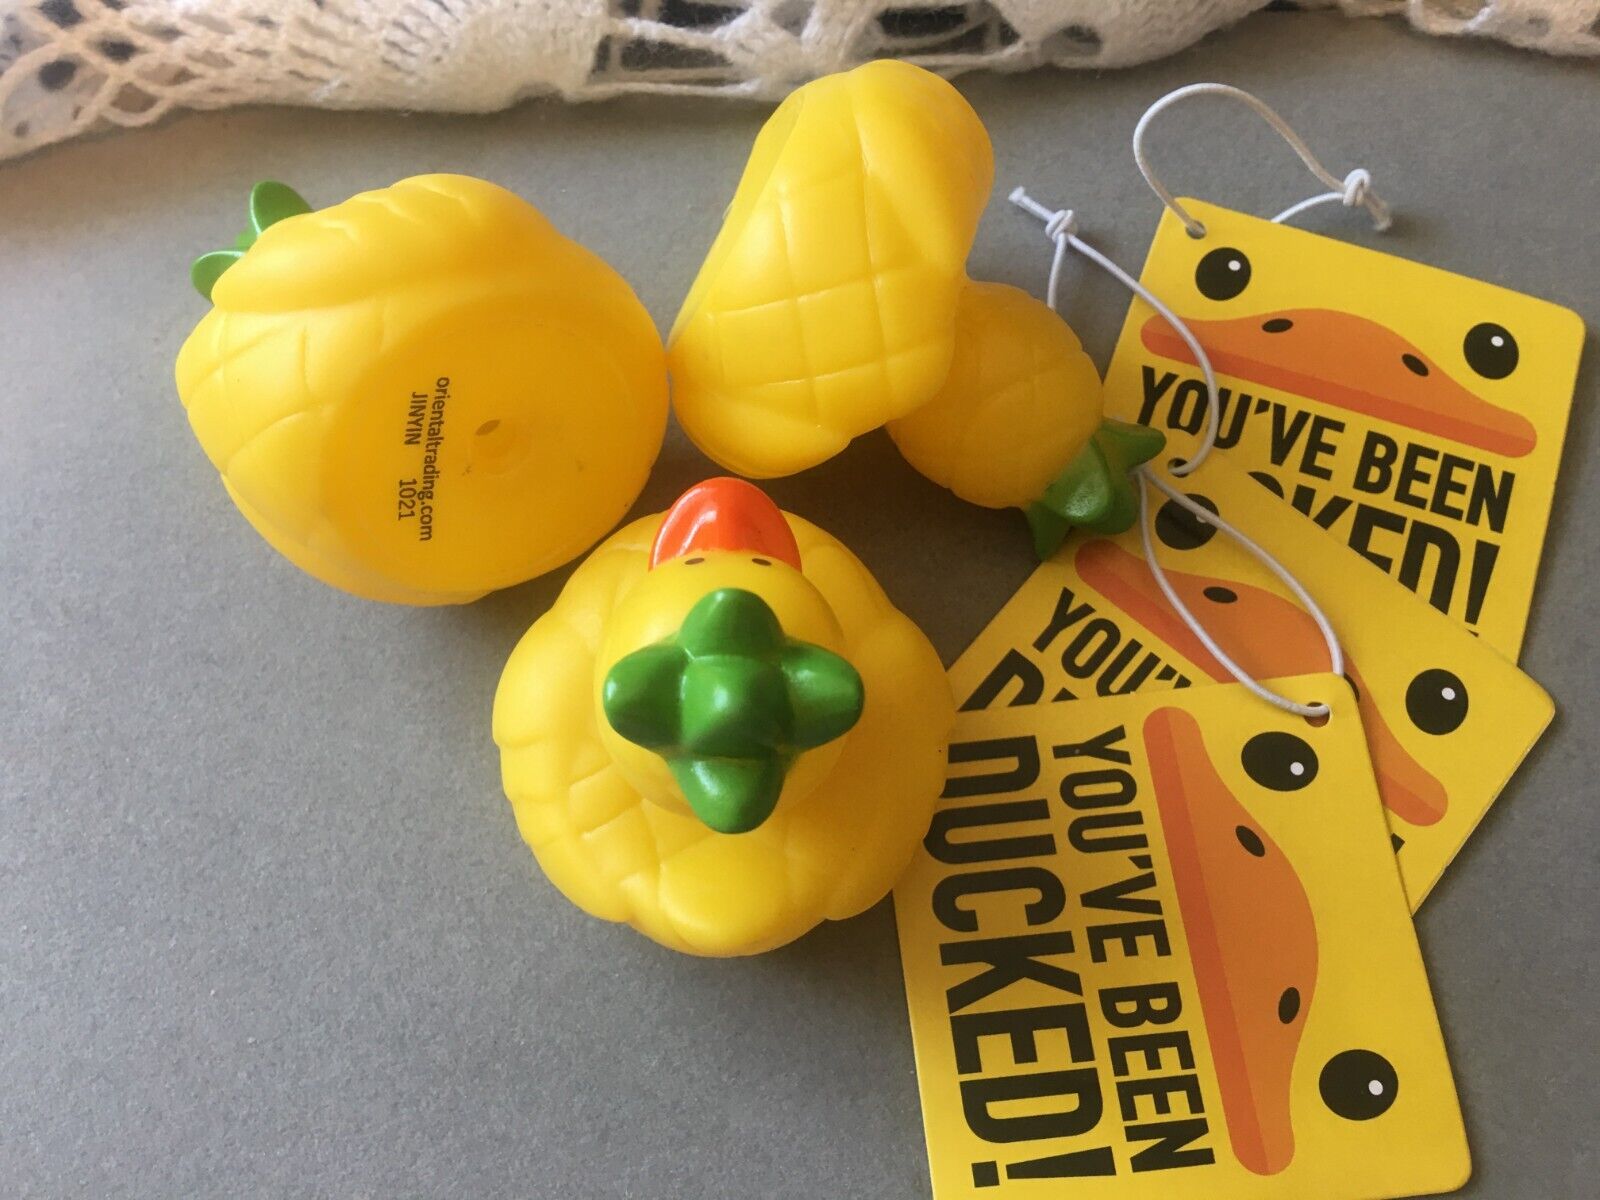 New 3 Lot RUBBER DUCKIES "You've Been Ducked!" Jeep Ducks +Cards Celebration 2x2 OTC 12/3854 - фотография #4